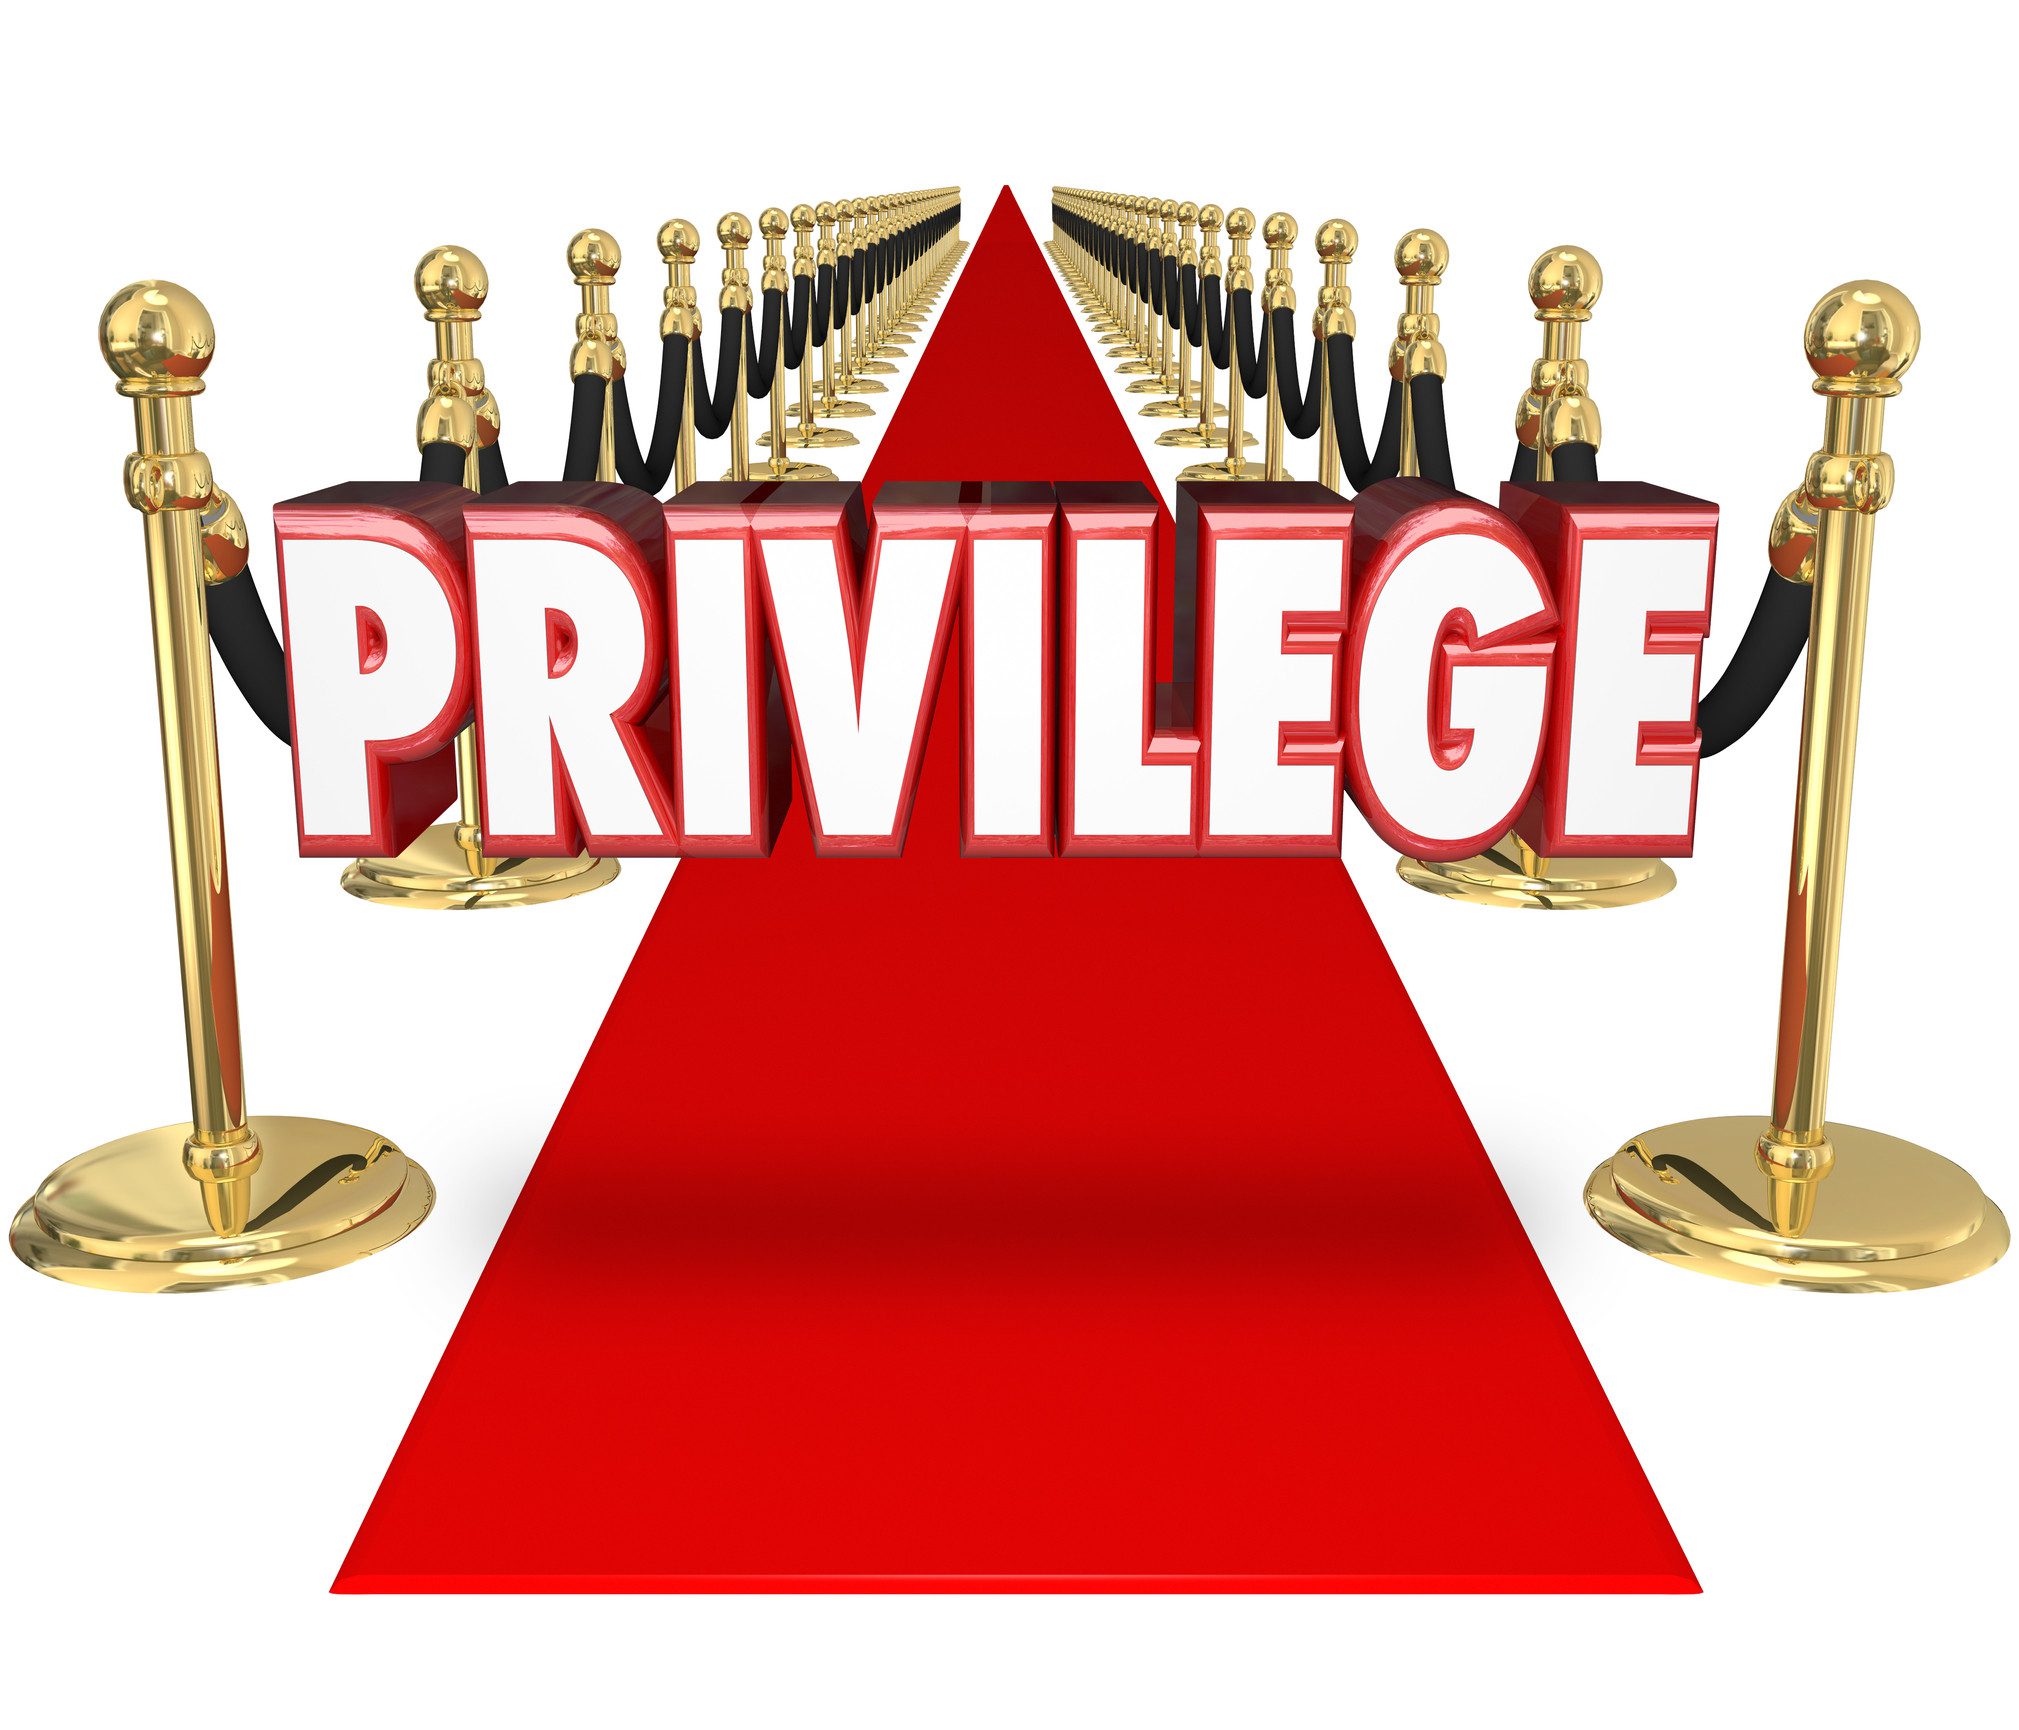 red carpet with word privilege written above it